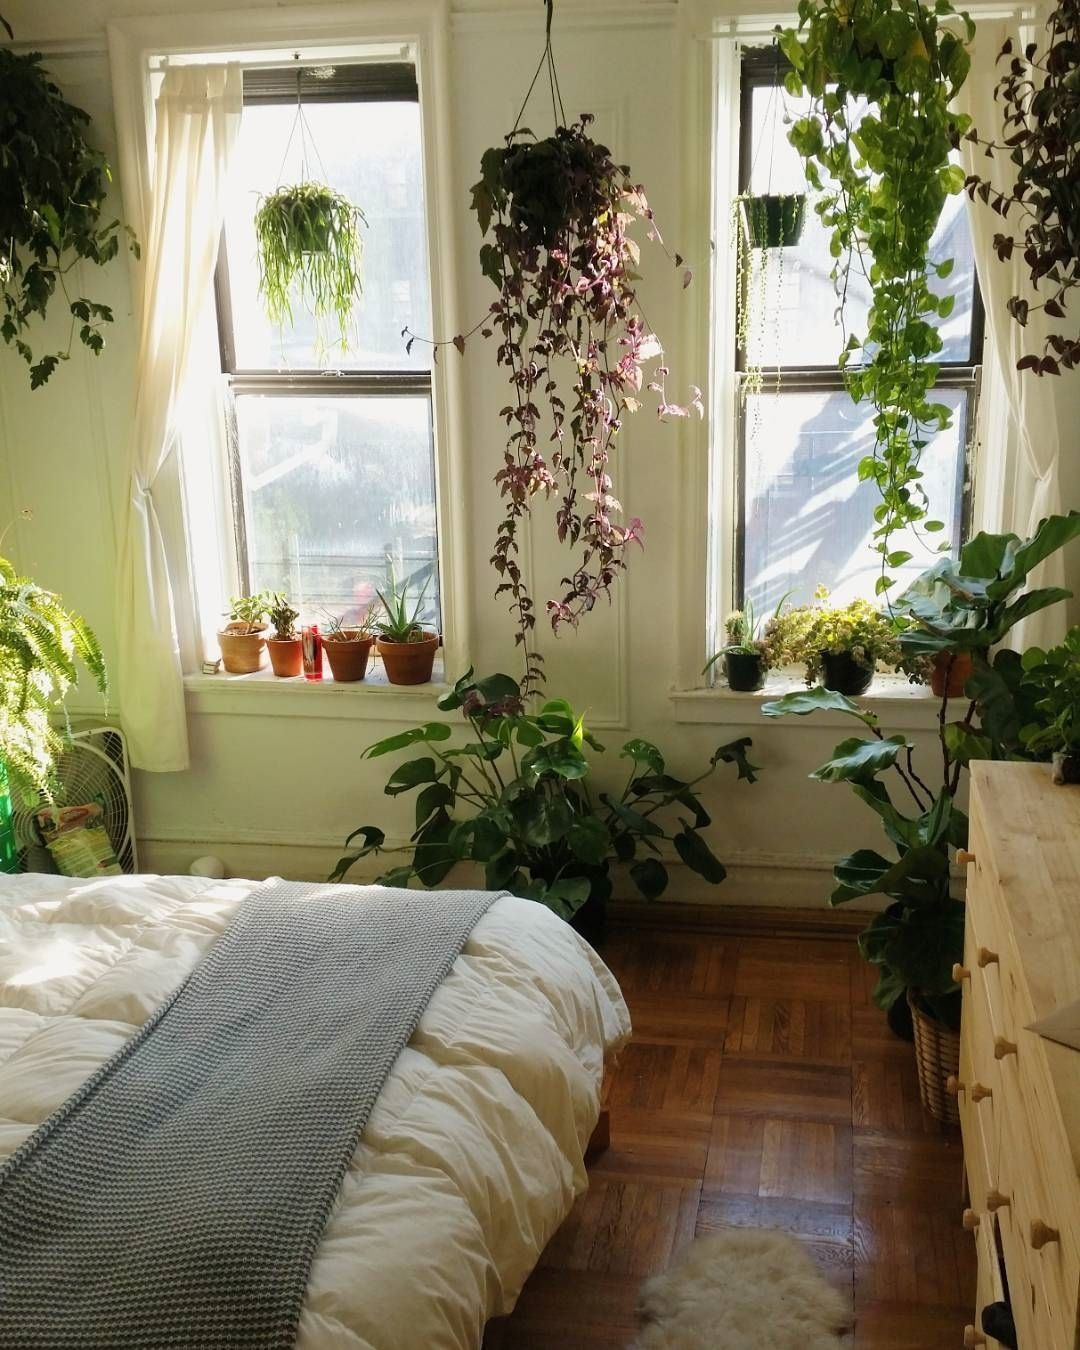 Small Plants For Bedroom
 Urban Jungle Bloggers on Instagram “We could stay here